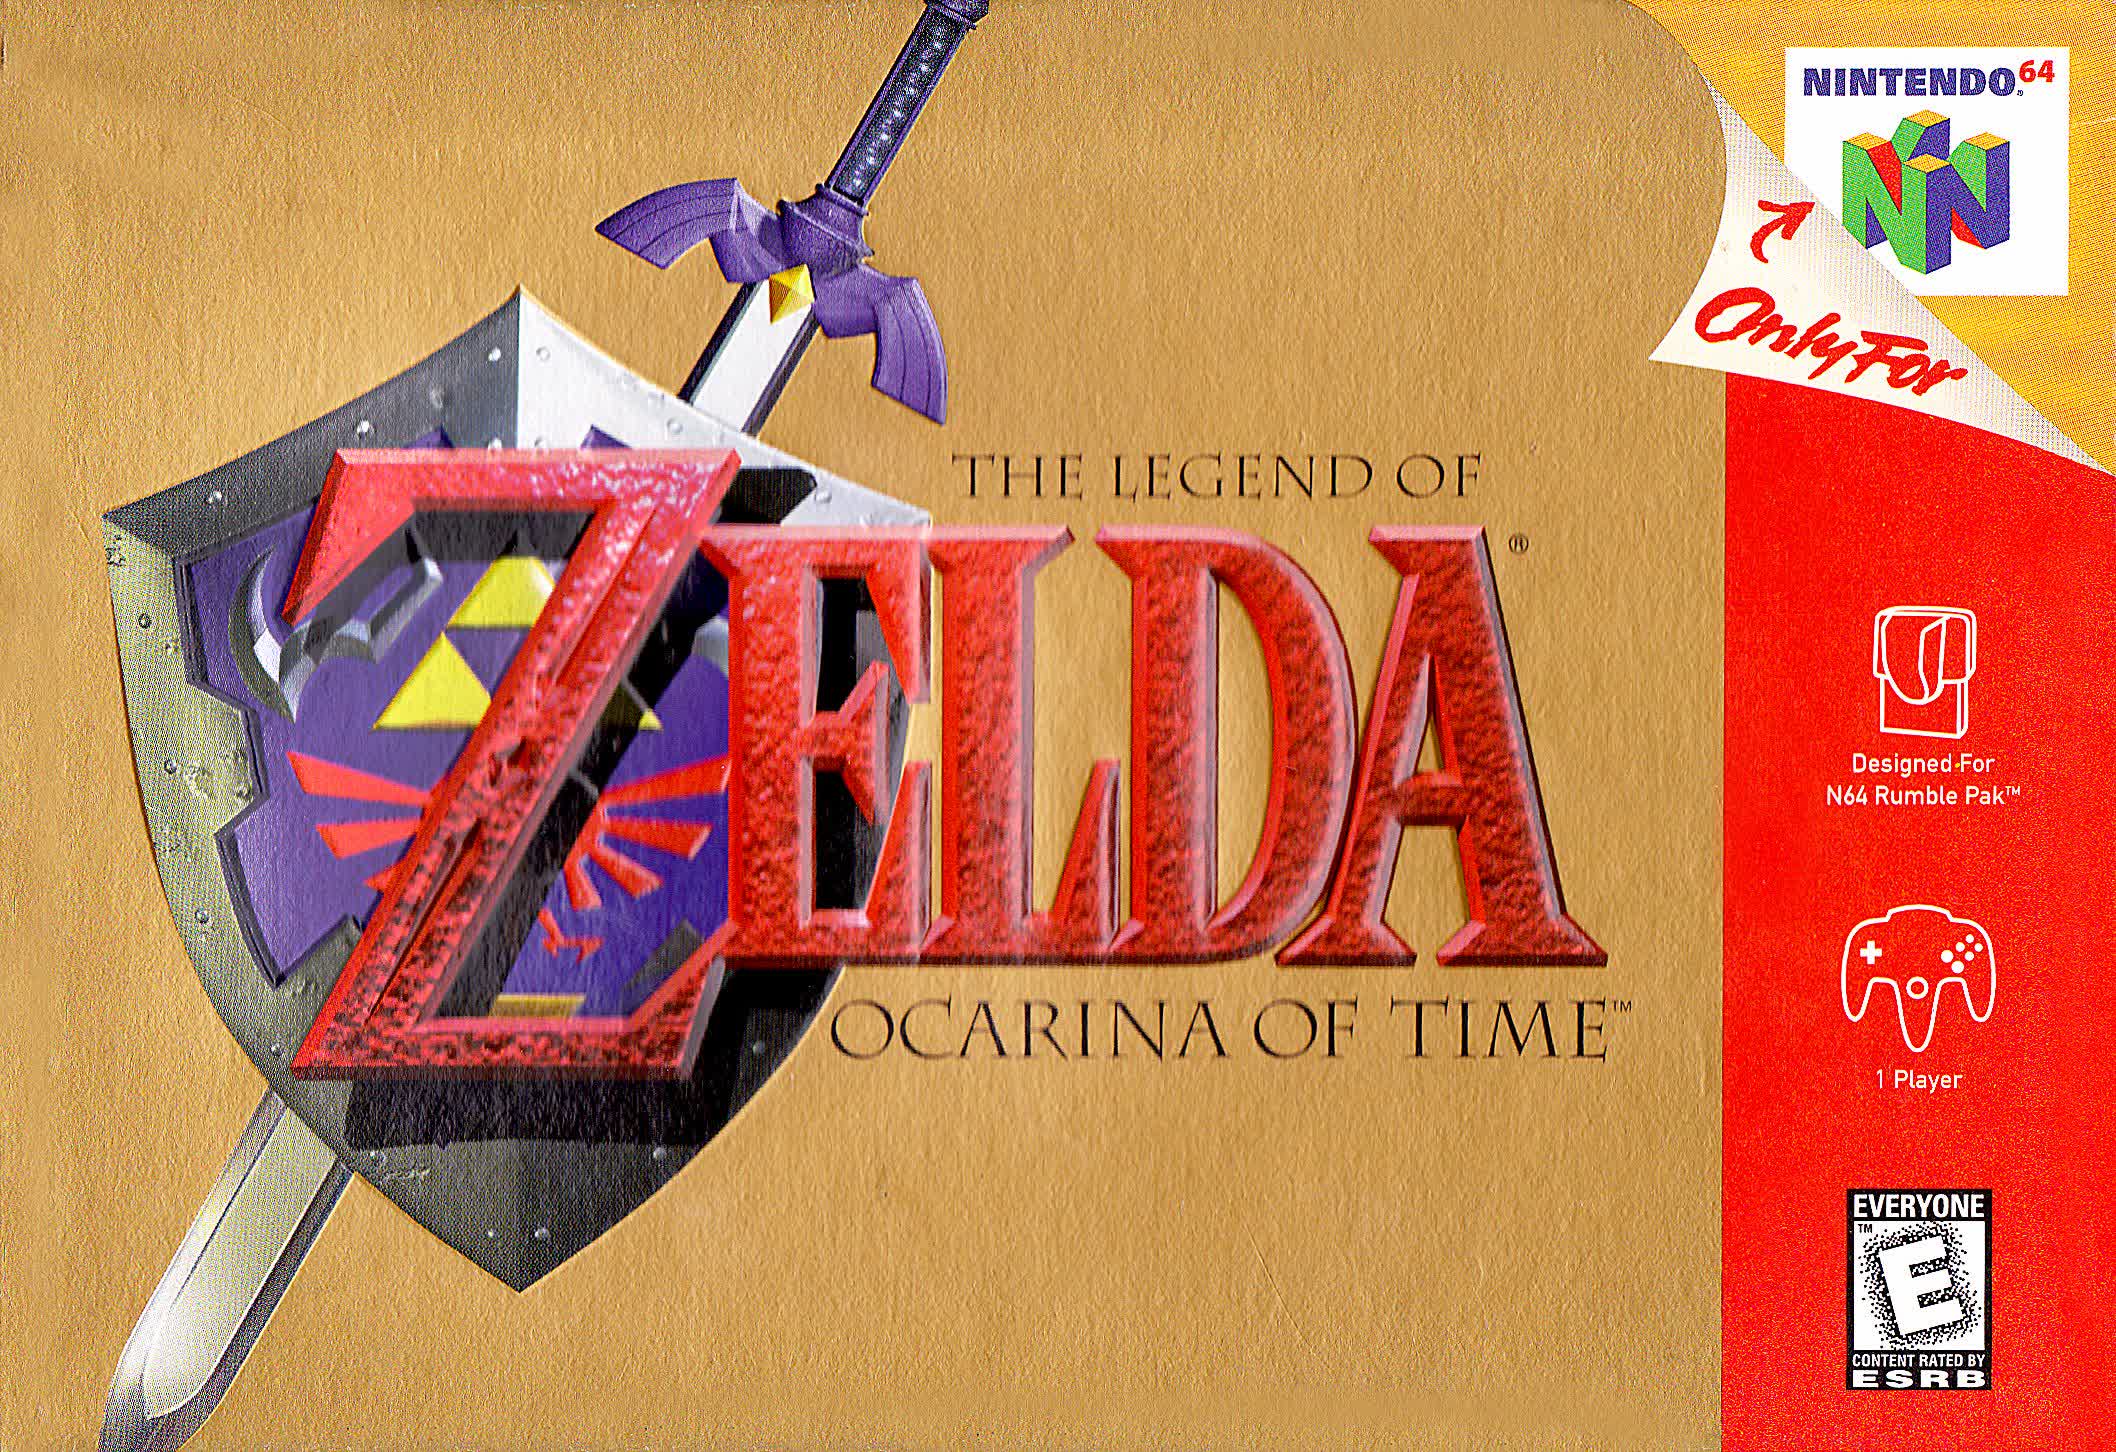 The Legend of Zelda: Ocarina of Time has been fully recreated in C code